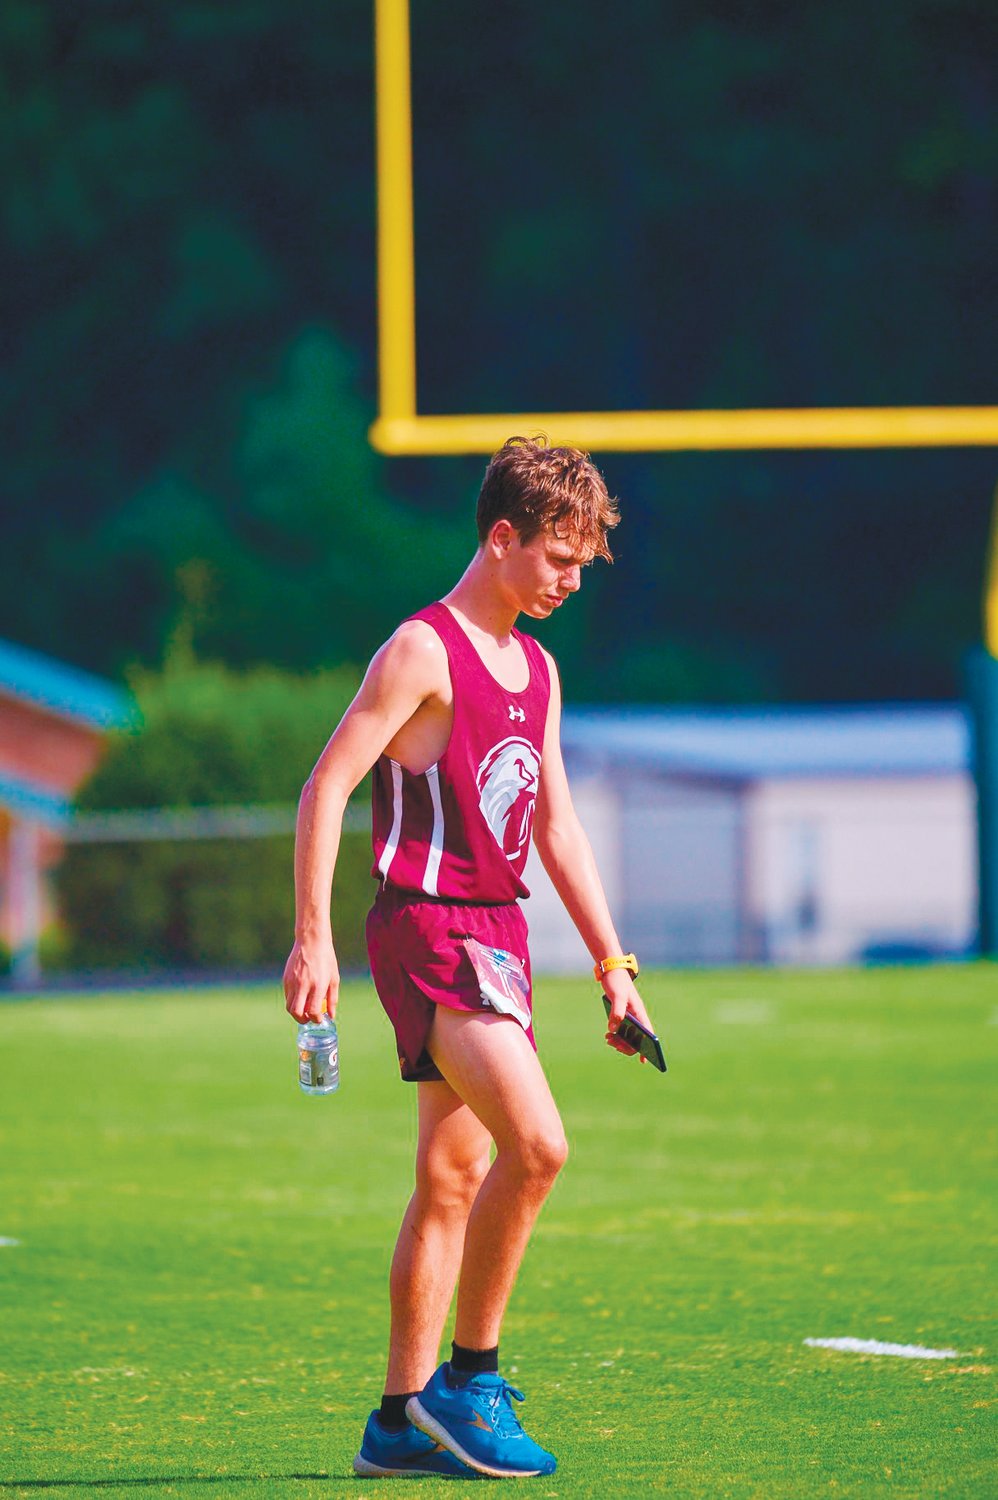 Seaforth freshman Jack Anstrom strolls along the sideline of Northwood's football field after taking first place in the men's race at the Chatham County Championships cross country meet last Thursday in Pittsboro. This was Anstrom's first official race since he was in 7th grade.